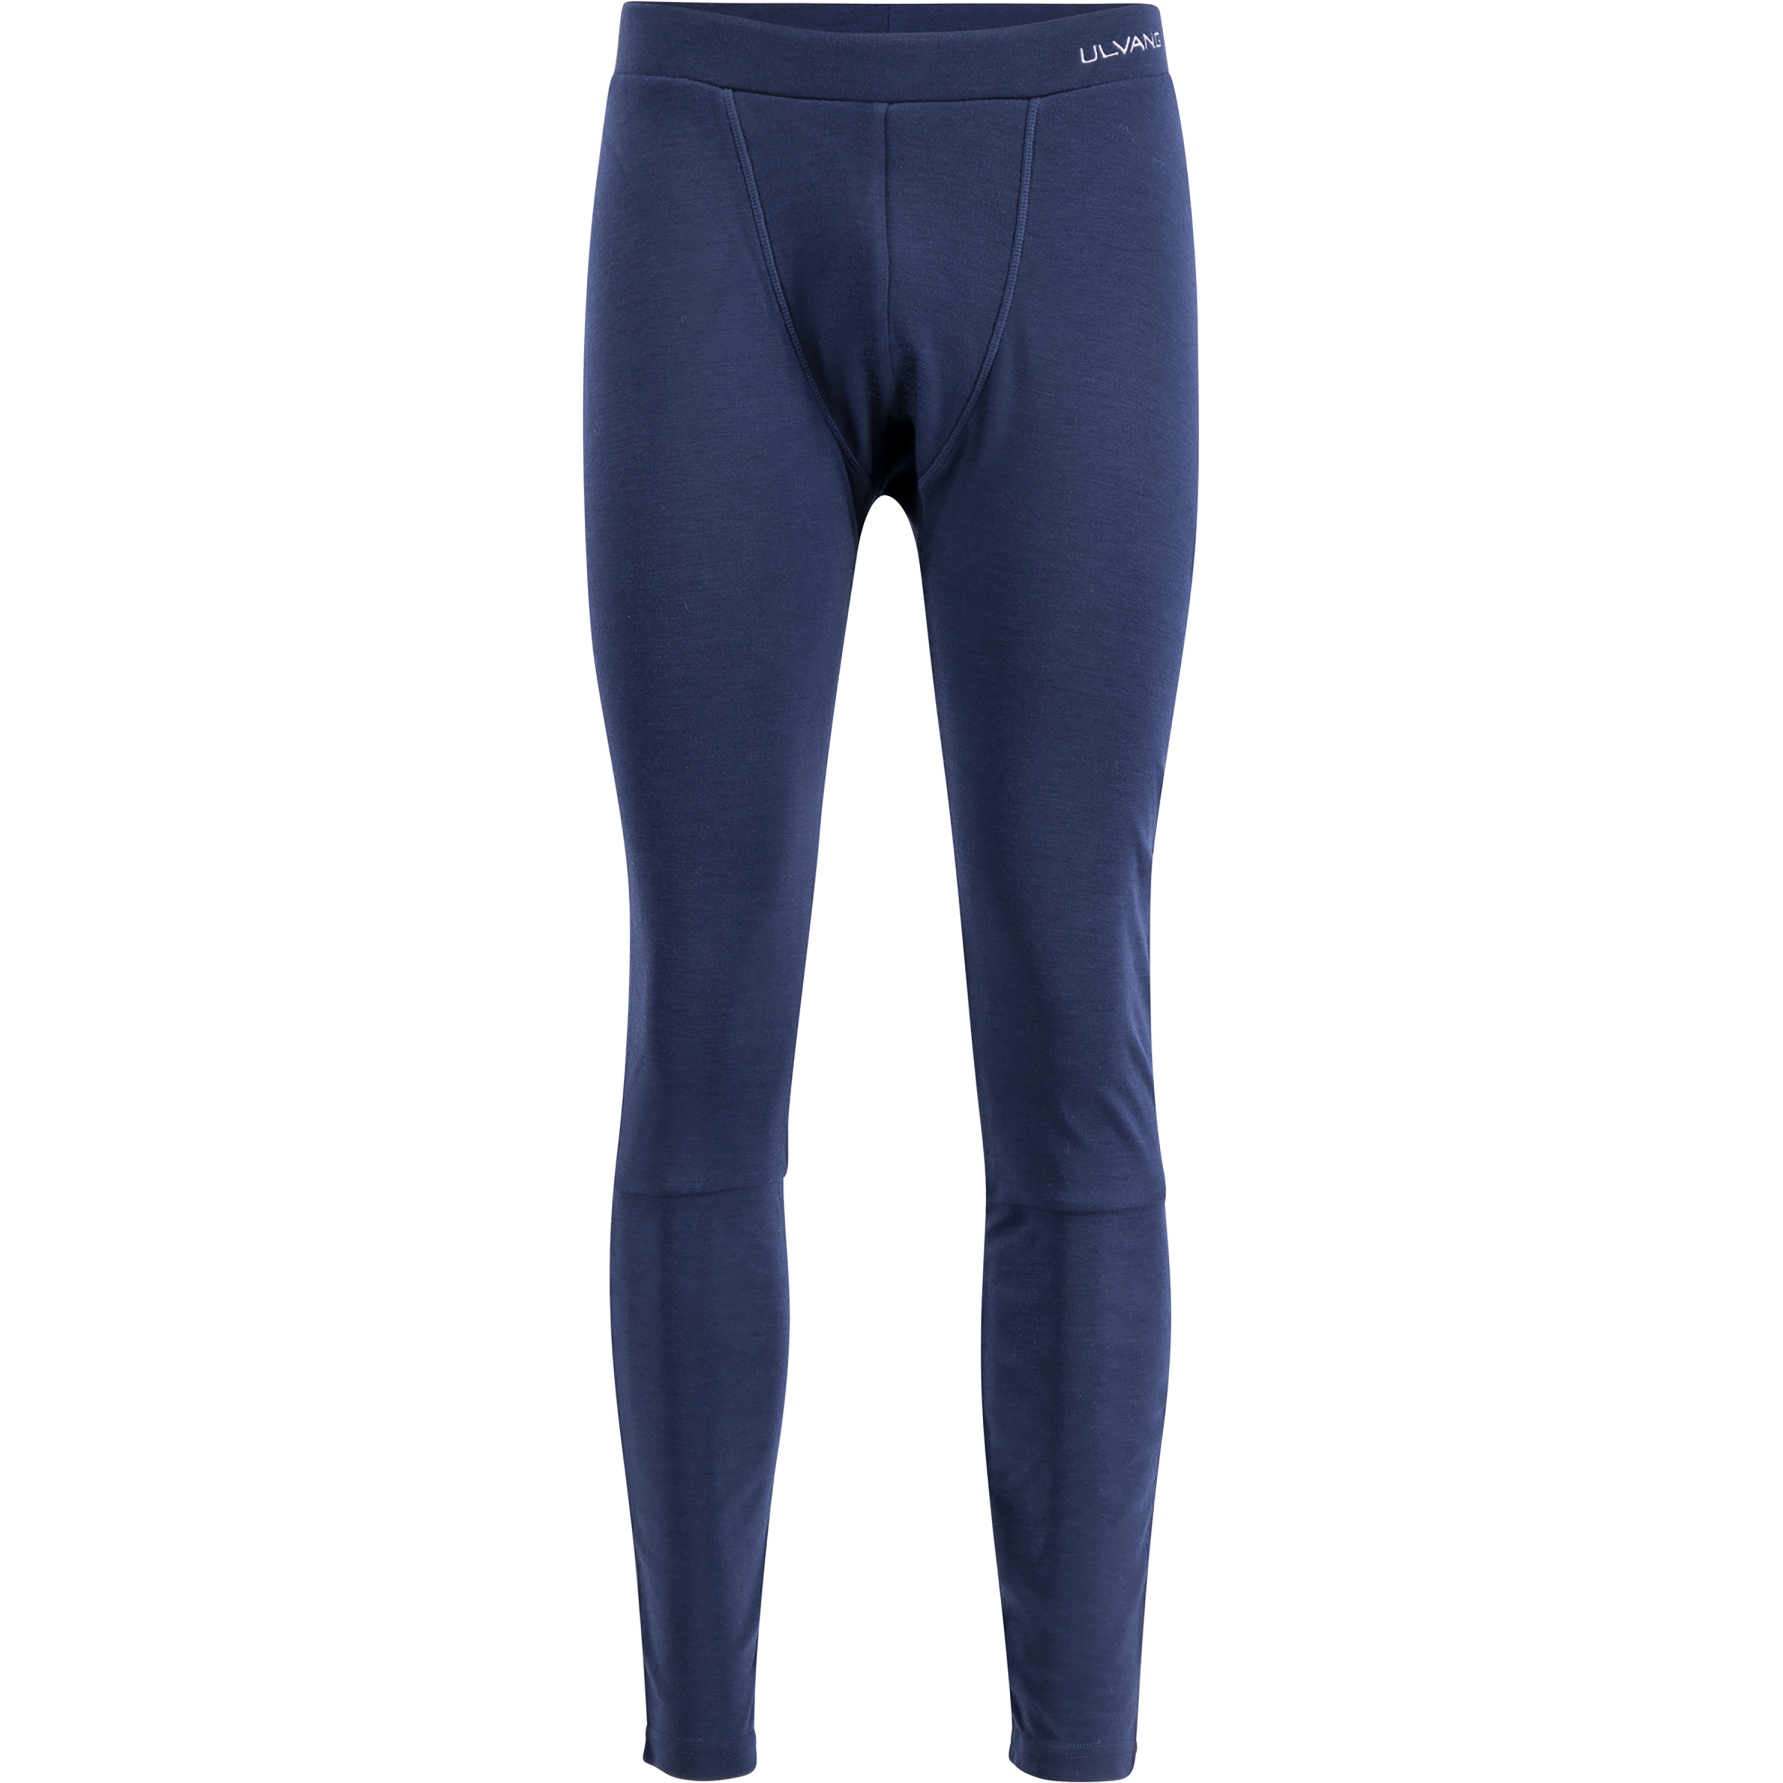 Picture of Ulvang Extreme Merino Net Pants - New Navy